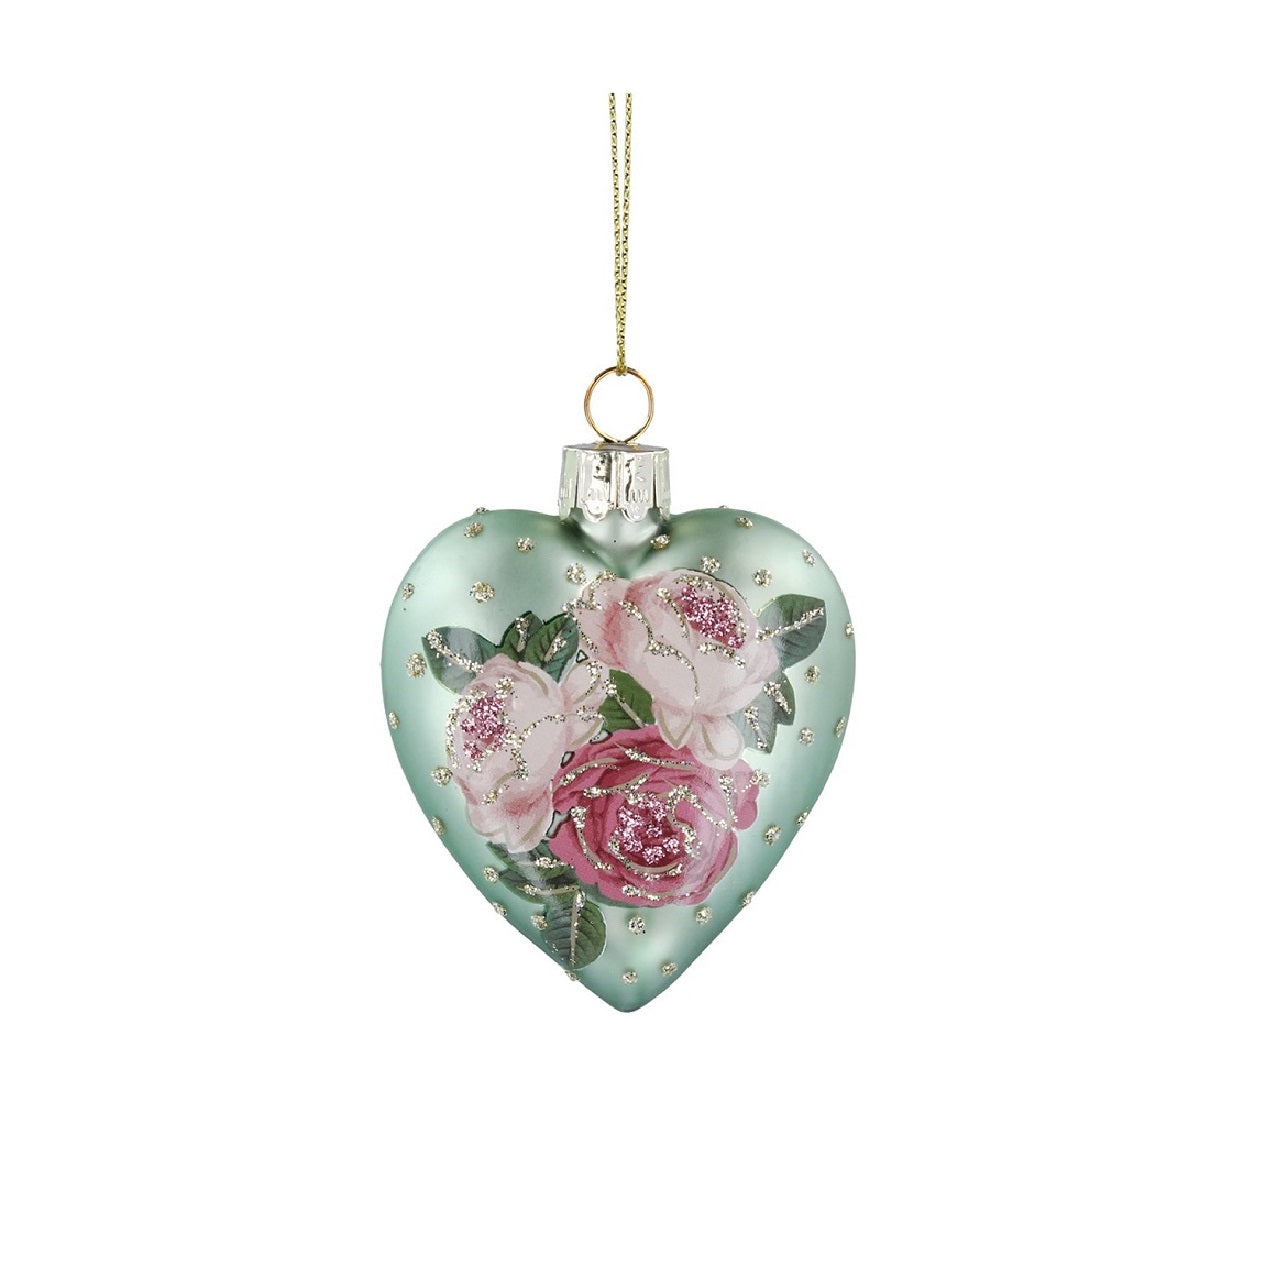 Pink Roses Heart-Shaped Christmas Hanging Decoration - Green  Browse our beautiful range of luxury Christmas tree decorations and ornaments for your tree this Christmas.  Add style to your Christmas tree with this elegant glittering heart-shaped hanging ornament with pink roses.